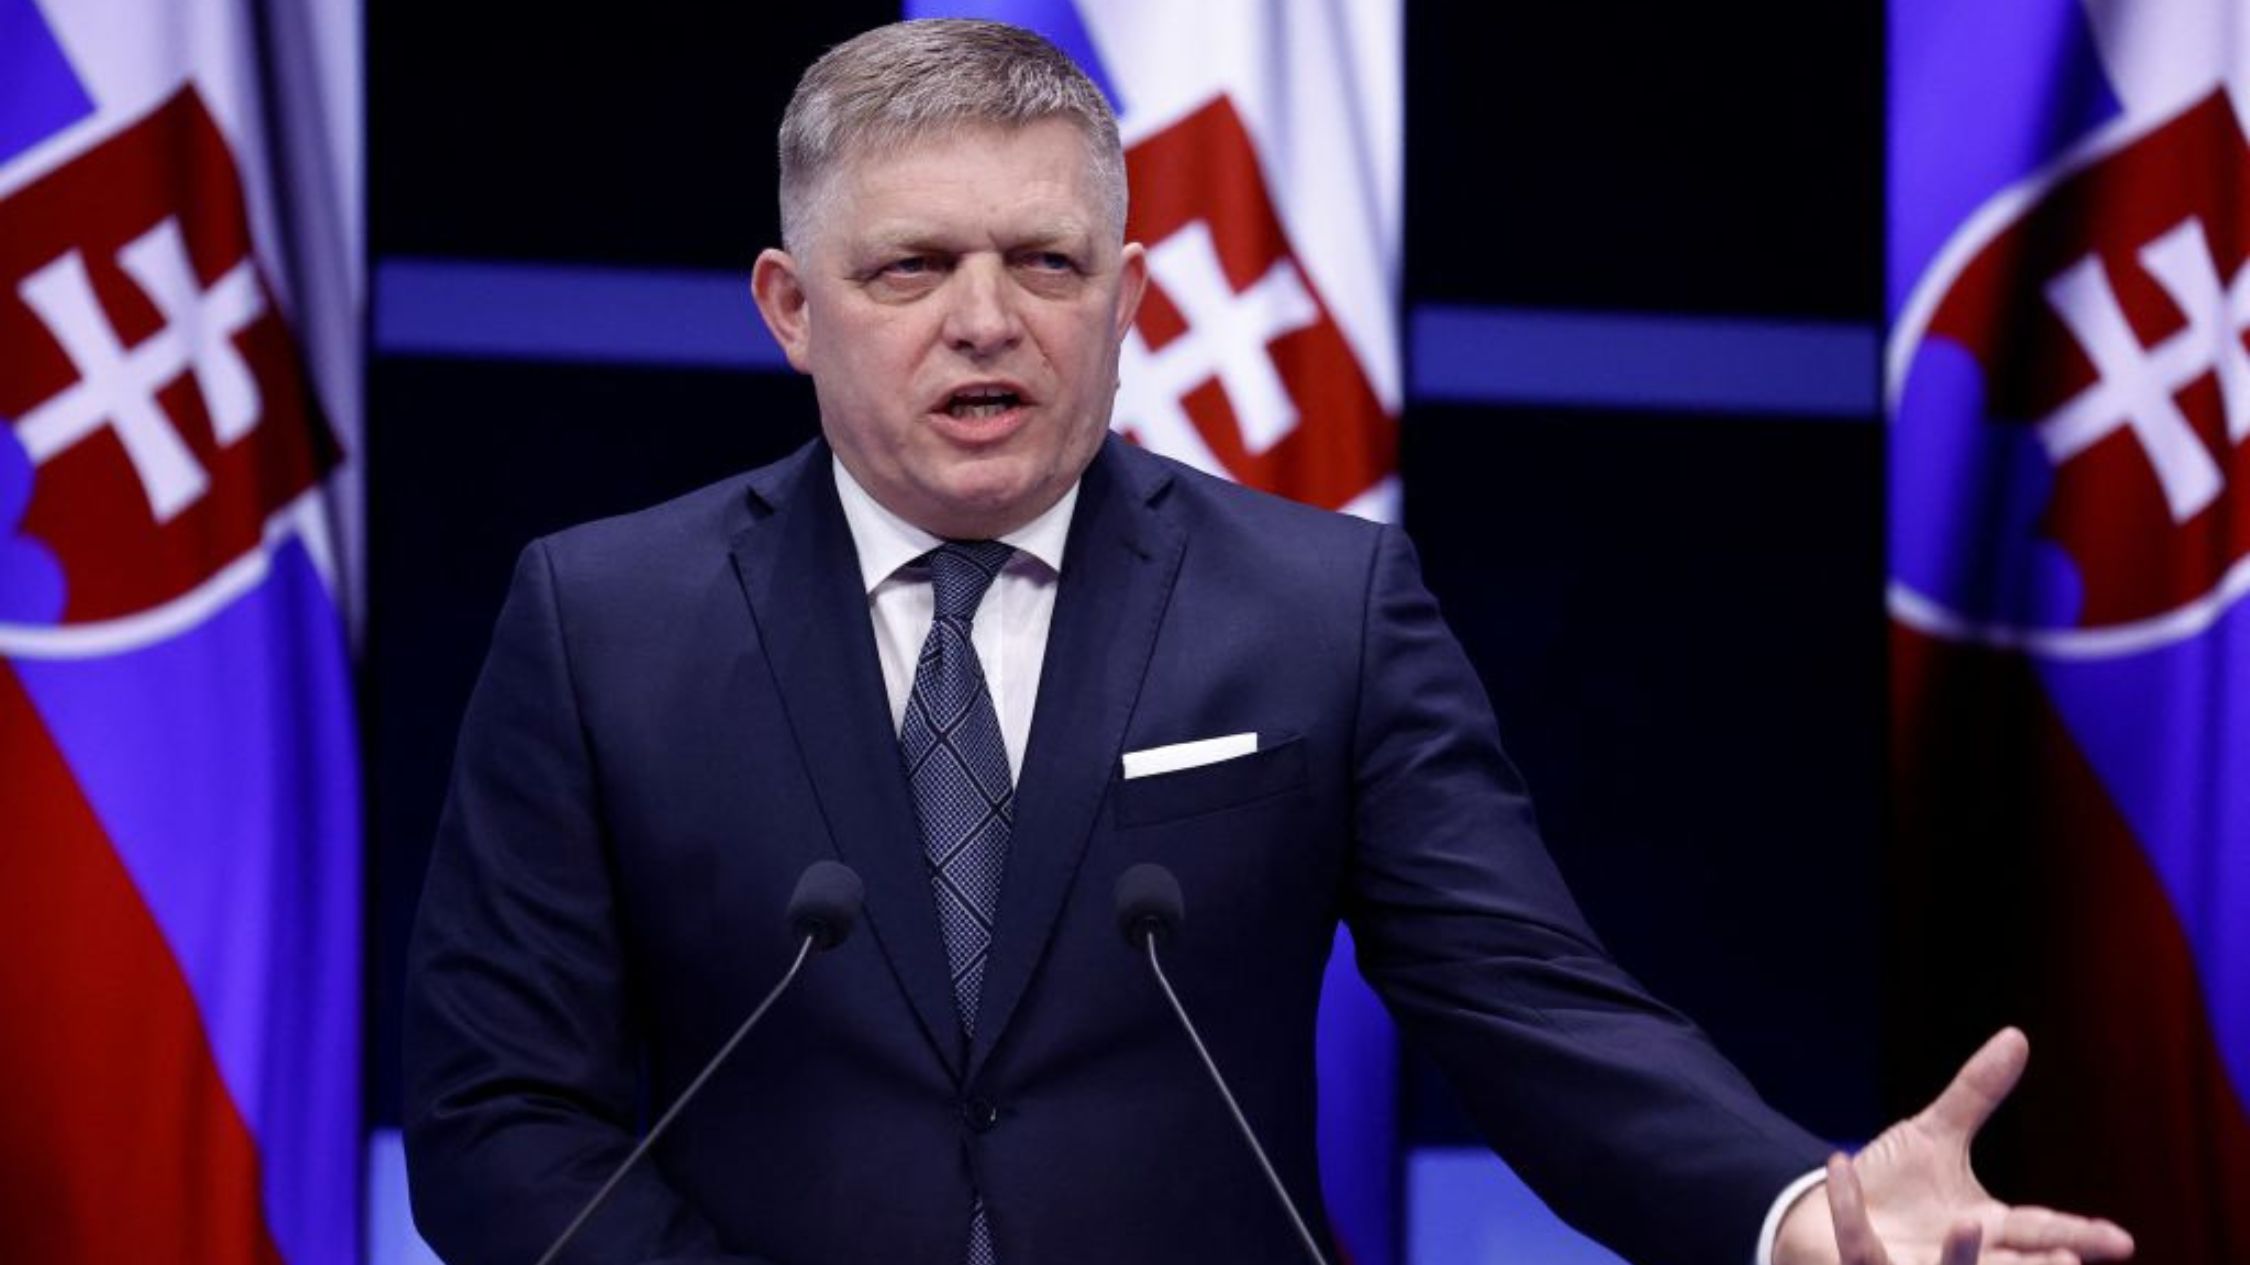 Why did they try to kill the Prime Minister of Slovakia?  We know this